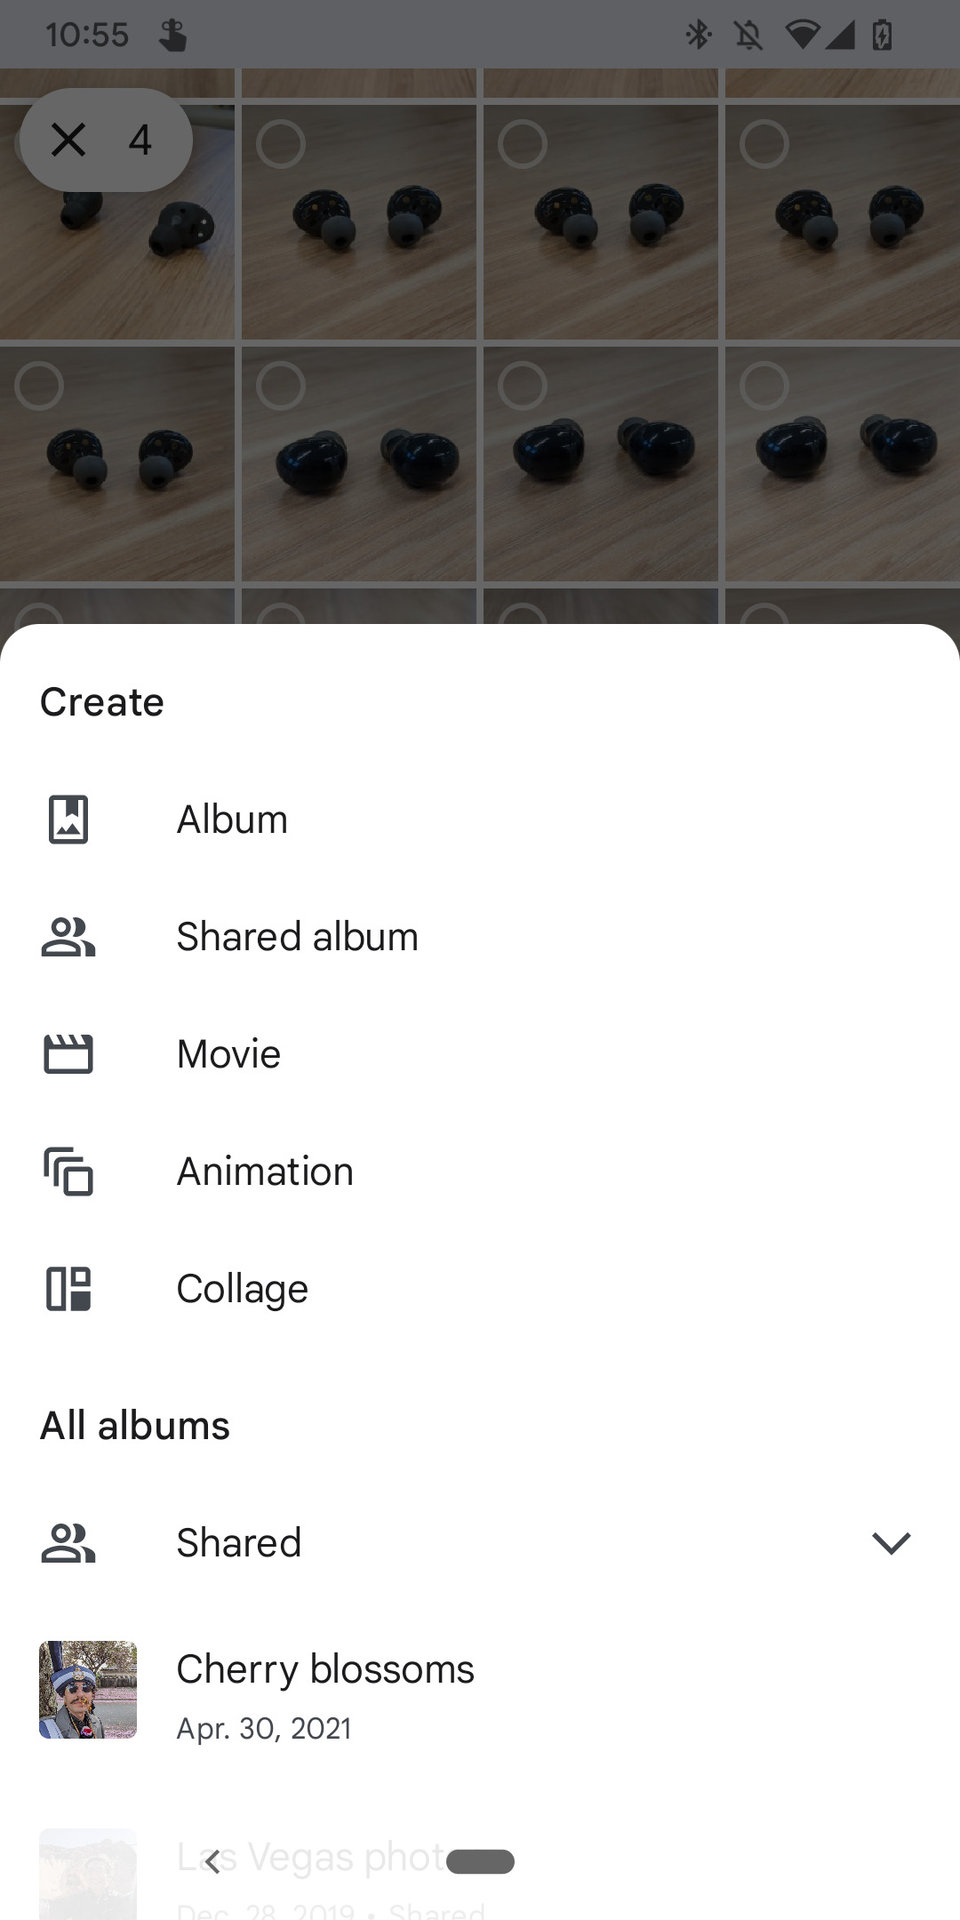 A screenshot of the Google Photos app showing the "Add to" menu.